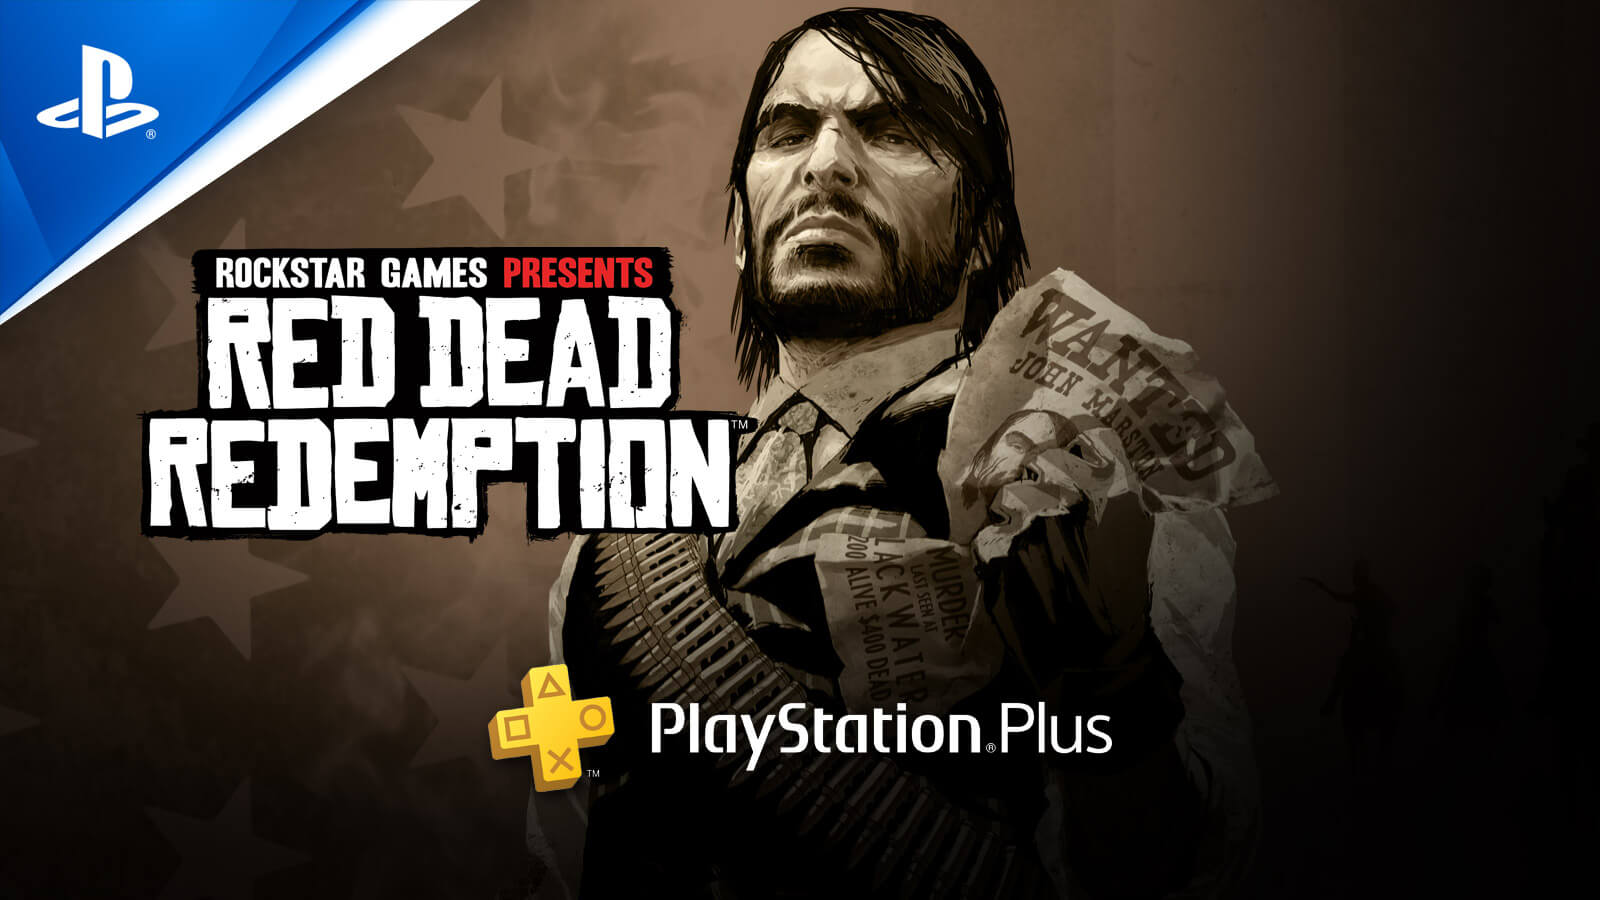 Red dead redemption на ps5. HEADHUNTER Redemption ps2 картинка.